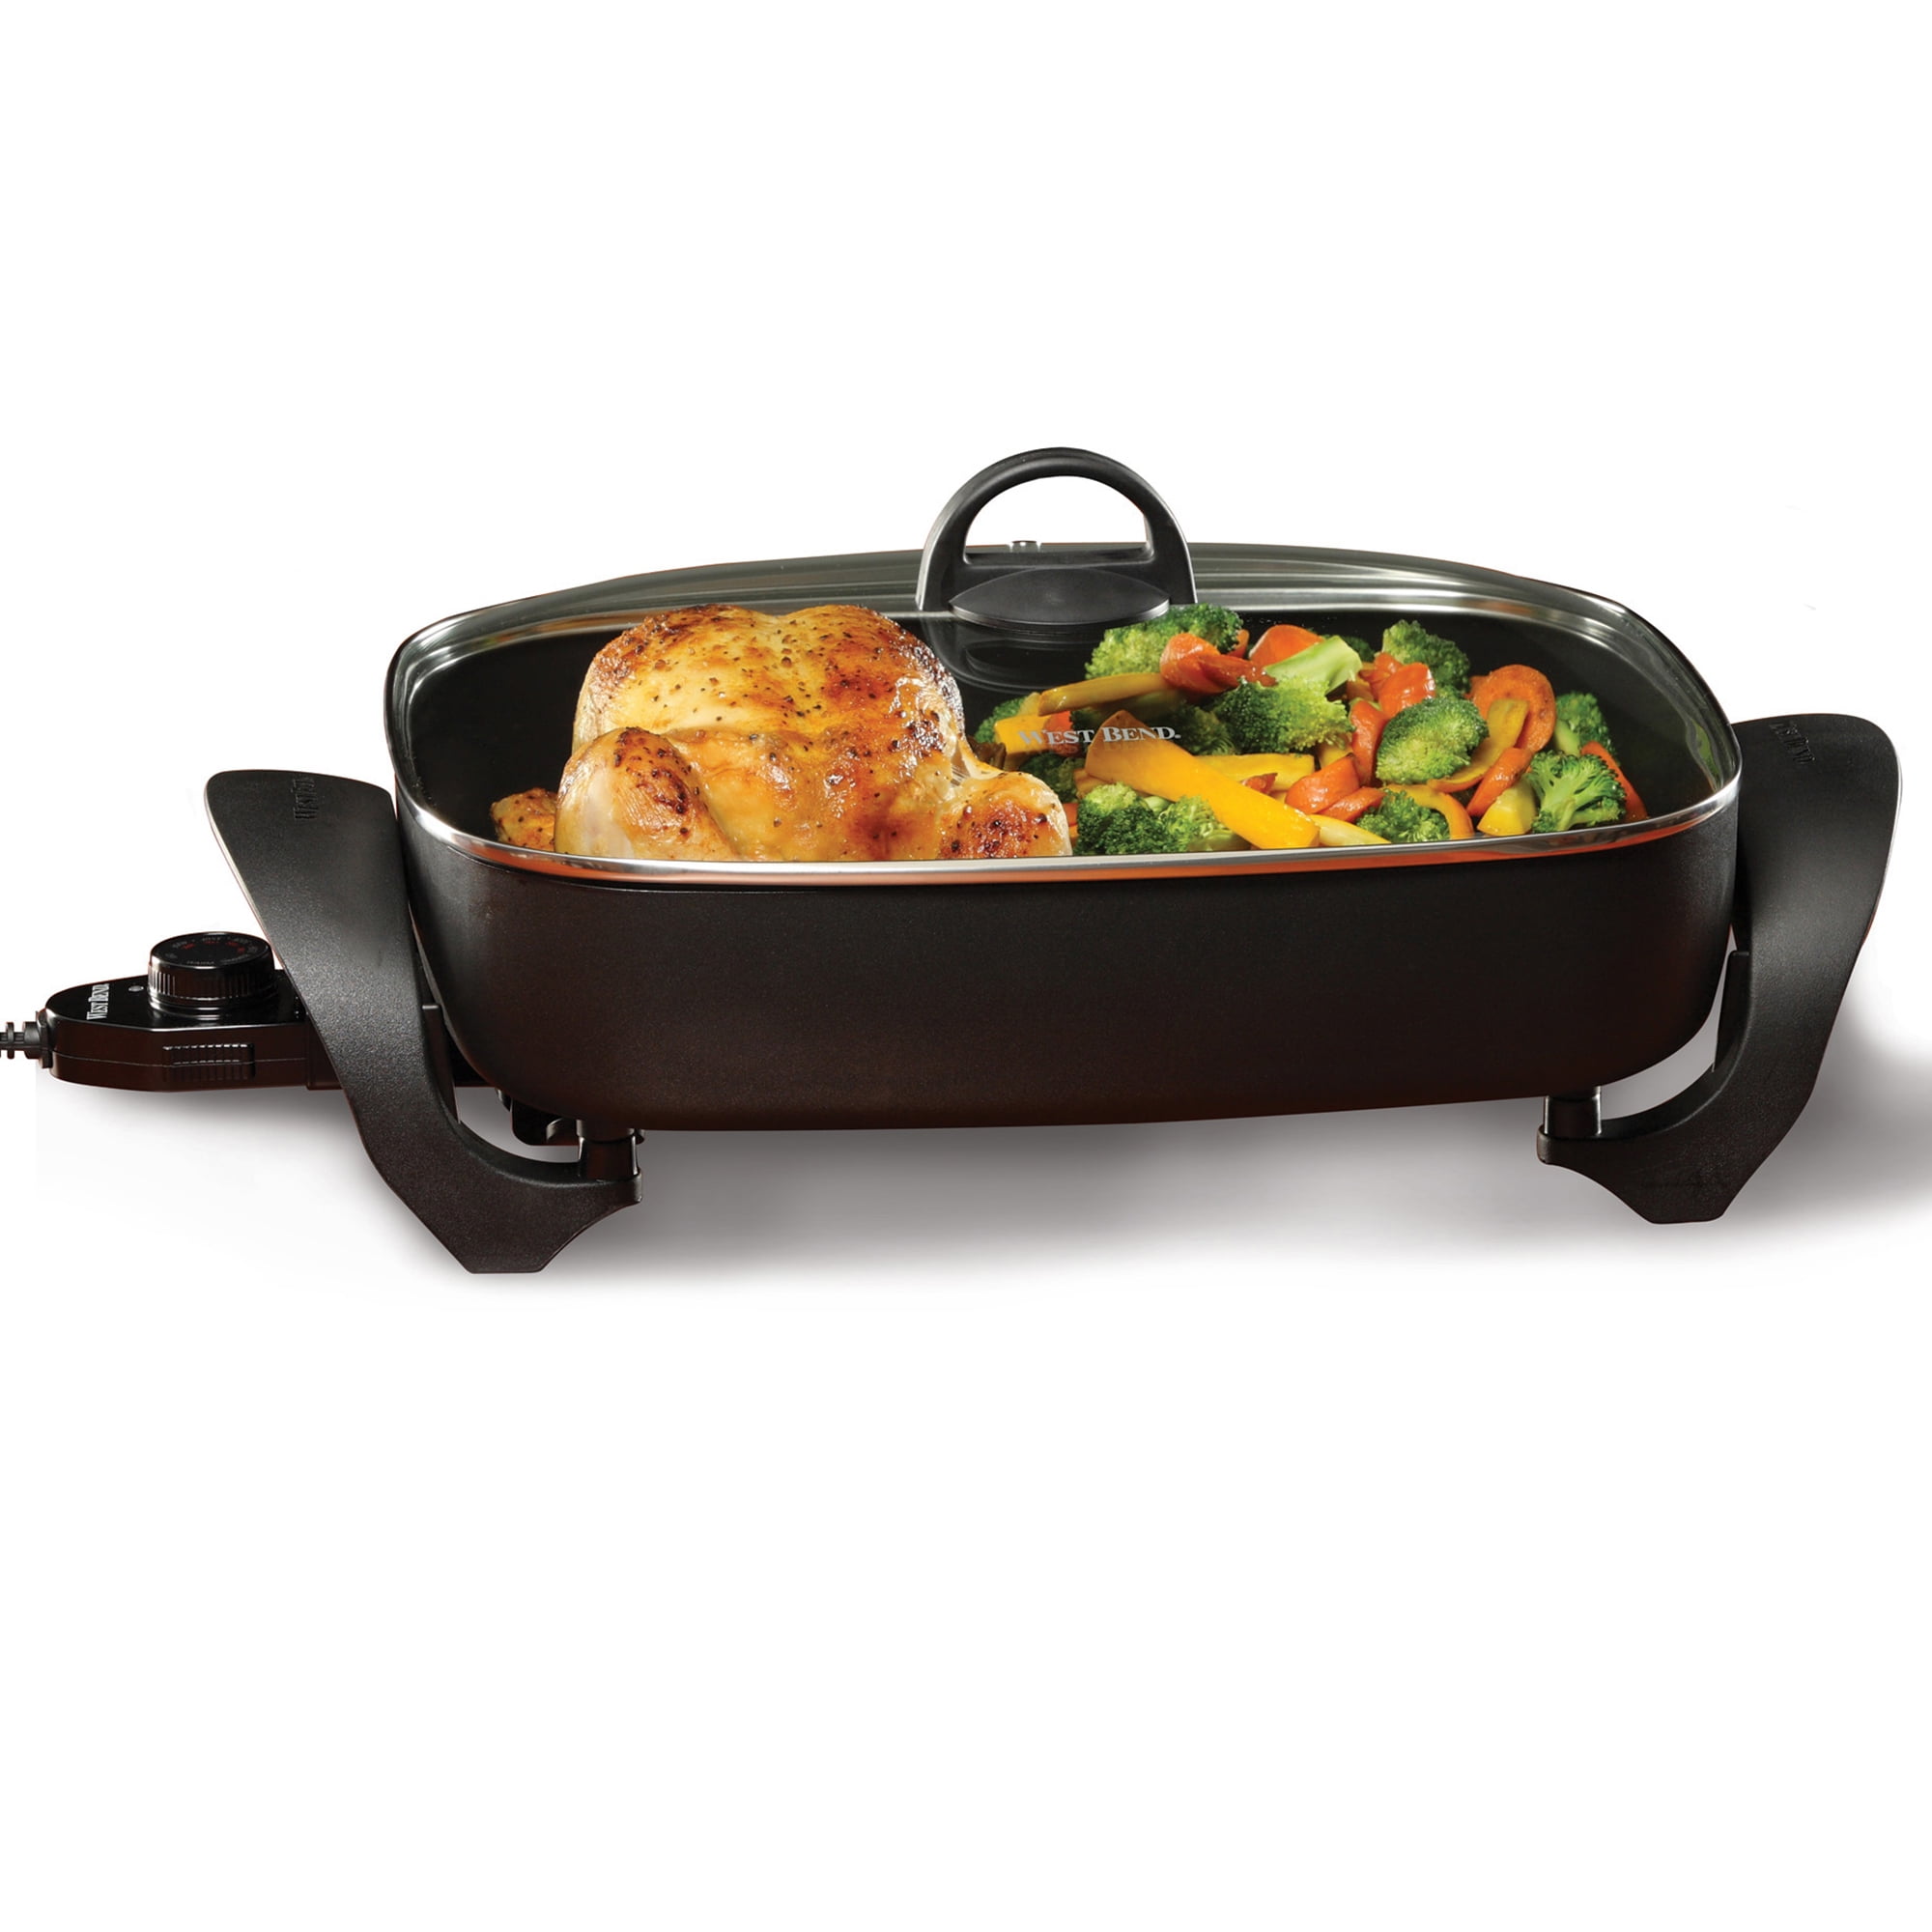 West Bend 72215 Extra-Deep 15-Inch Electric Skillet 